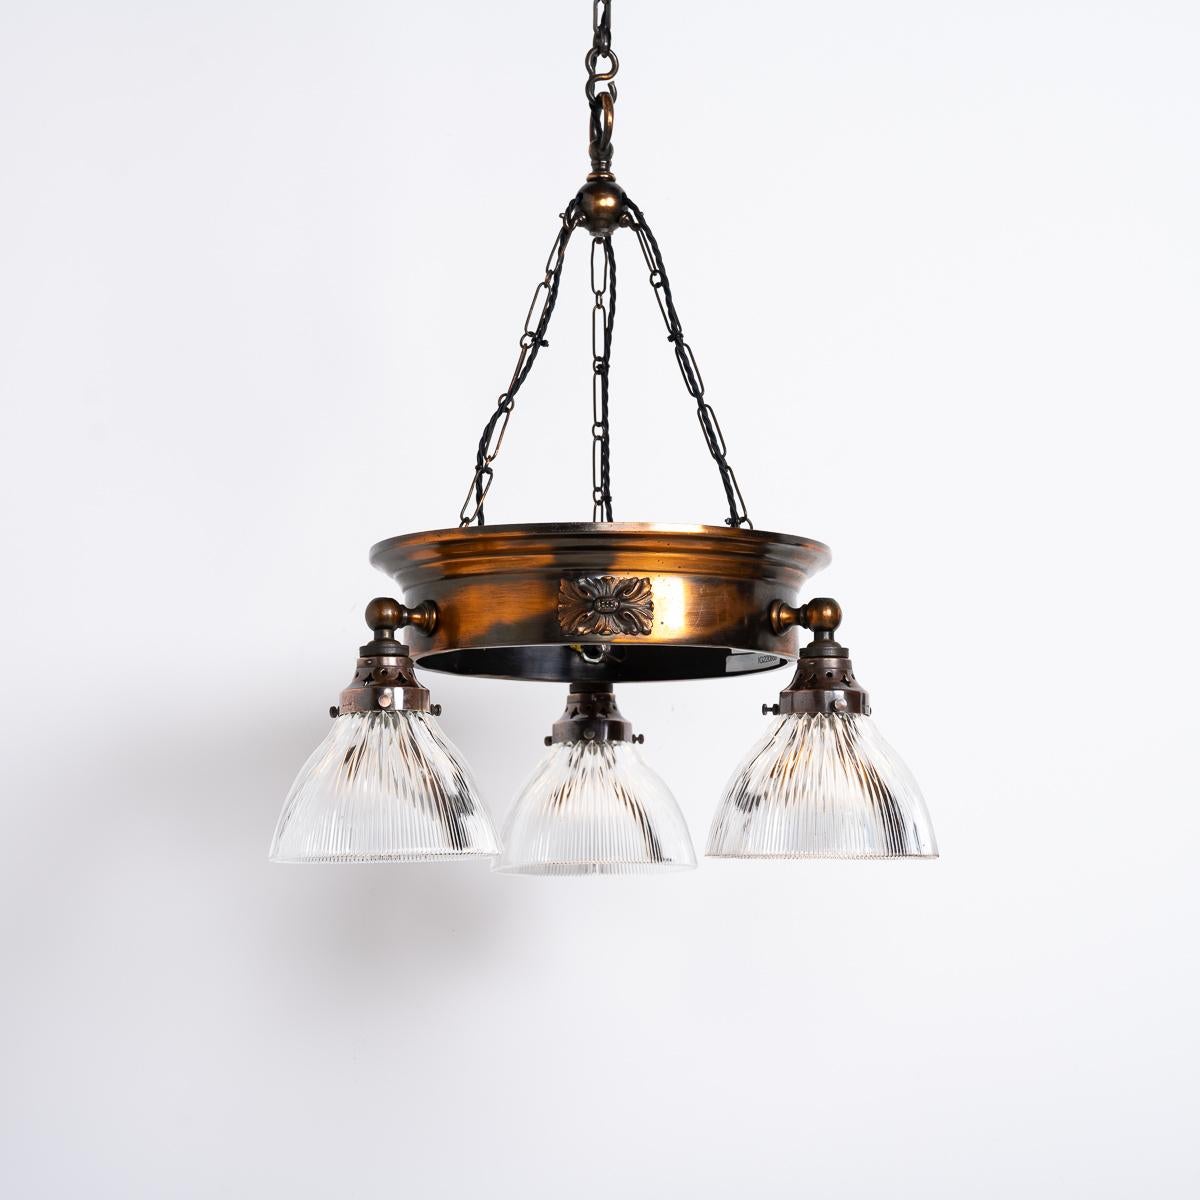 Brass Antique Copper Ring Chandelier With Prismatic Holophane Glass Shades By Gec For Sale